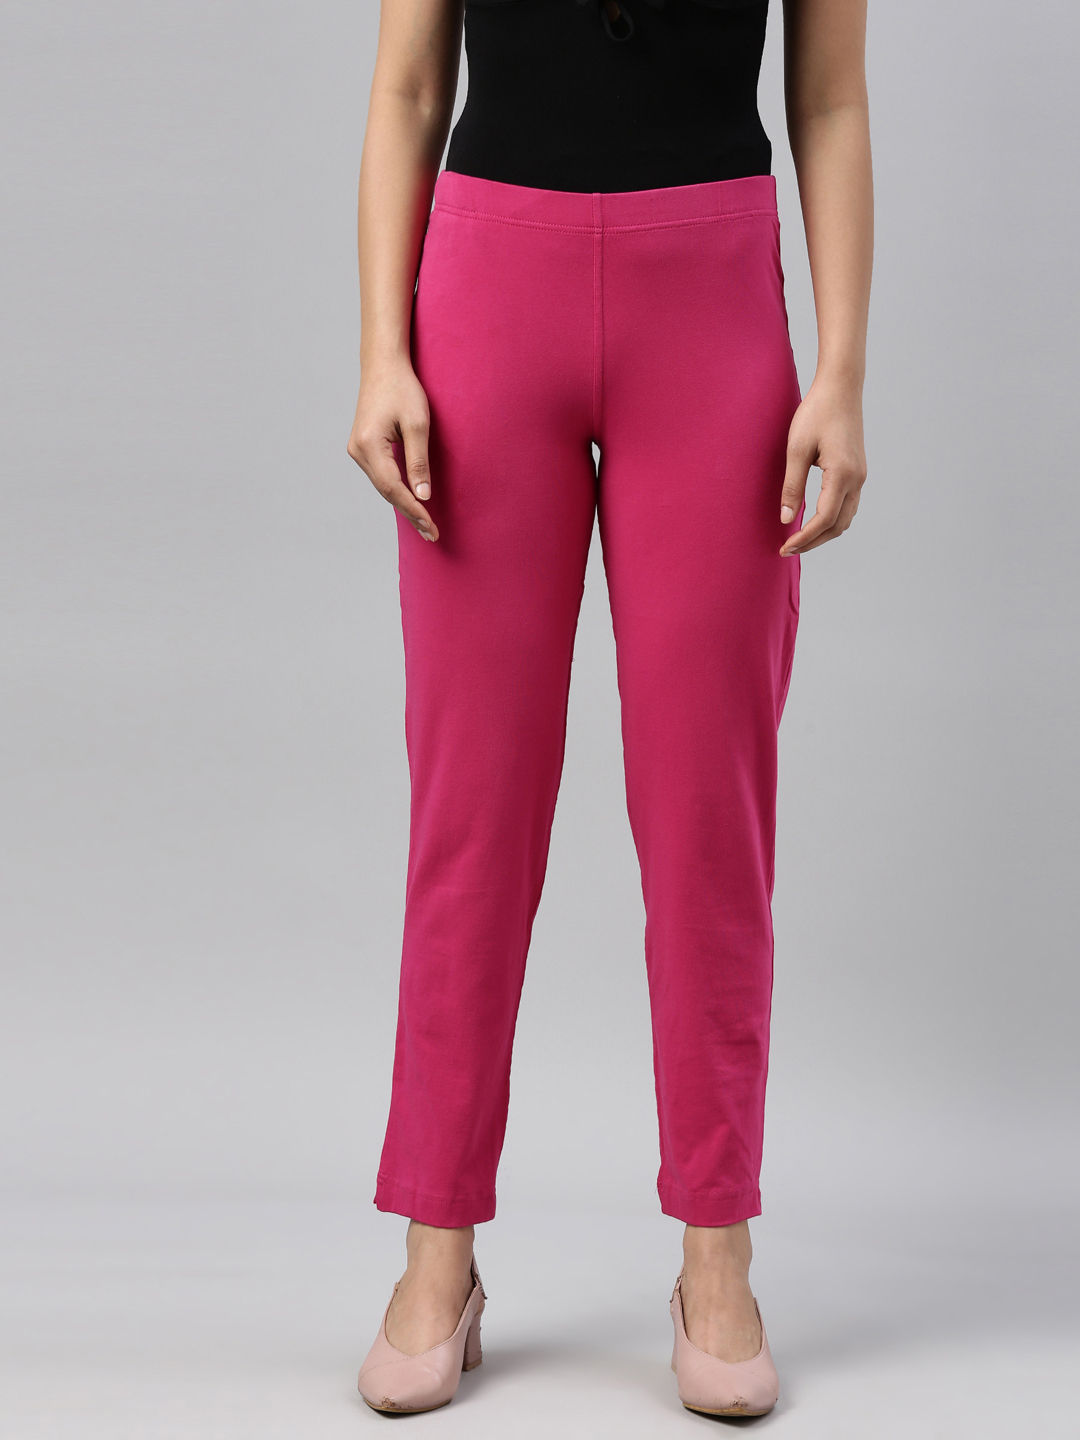 Tanya Control Top Faux Leather Pants in Hot Pink - Judy Blue